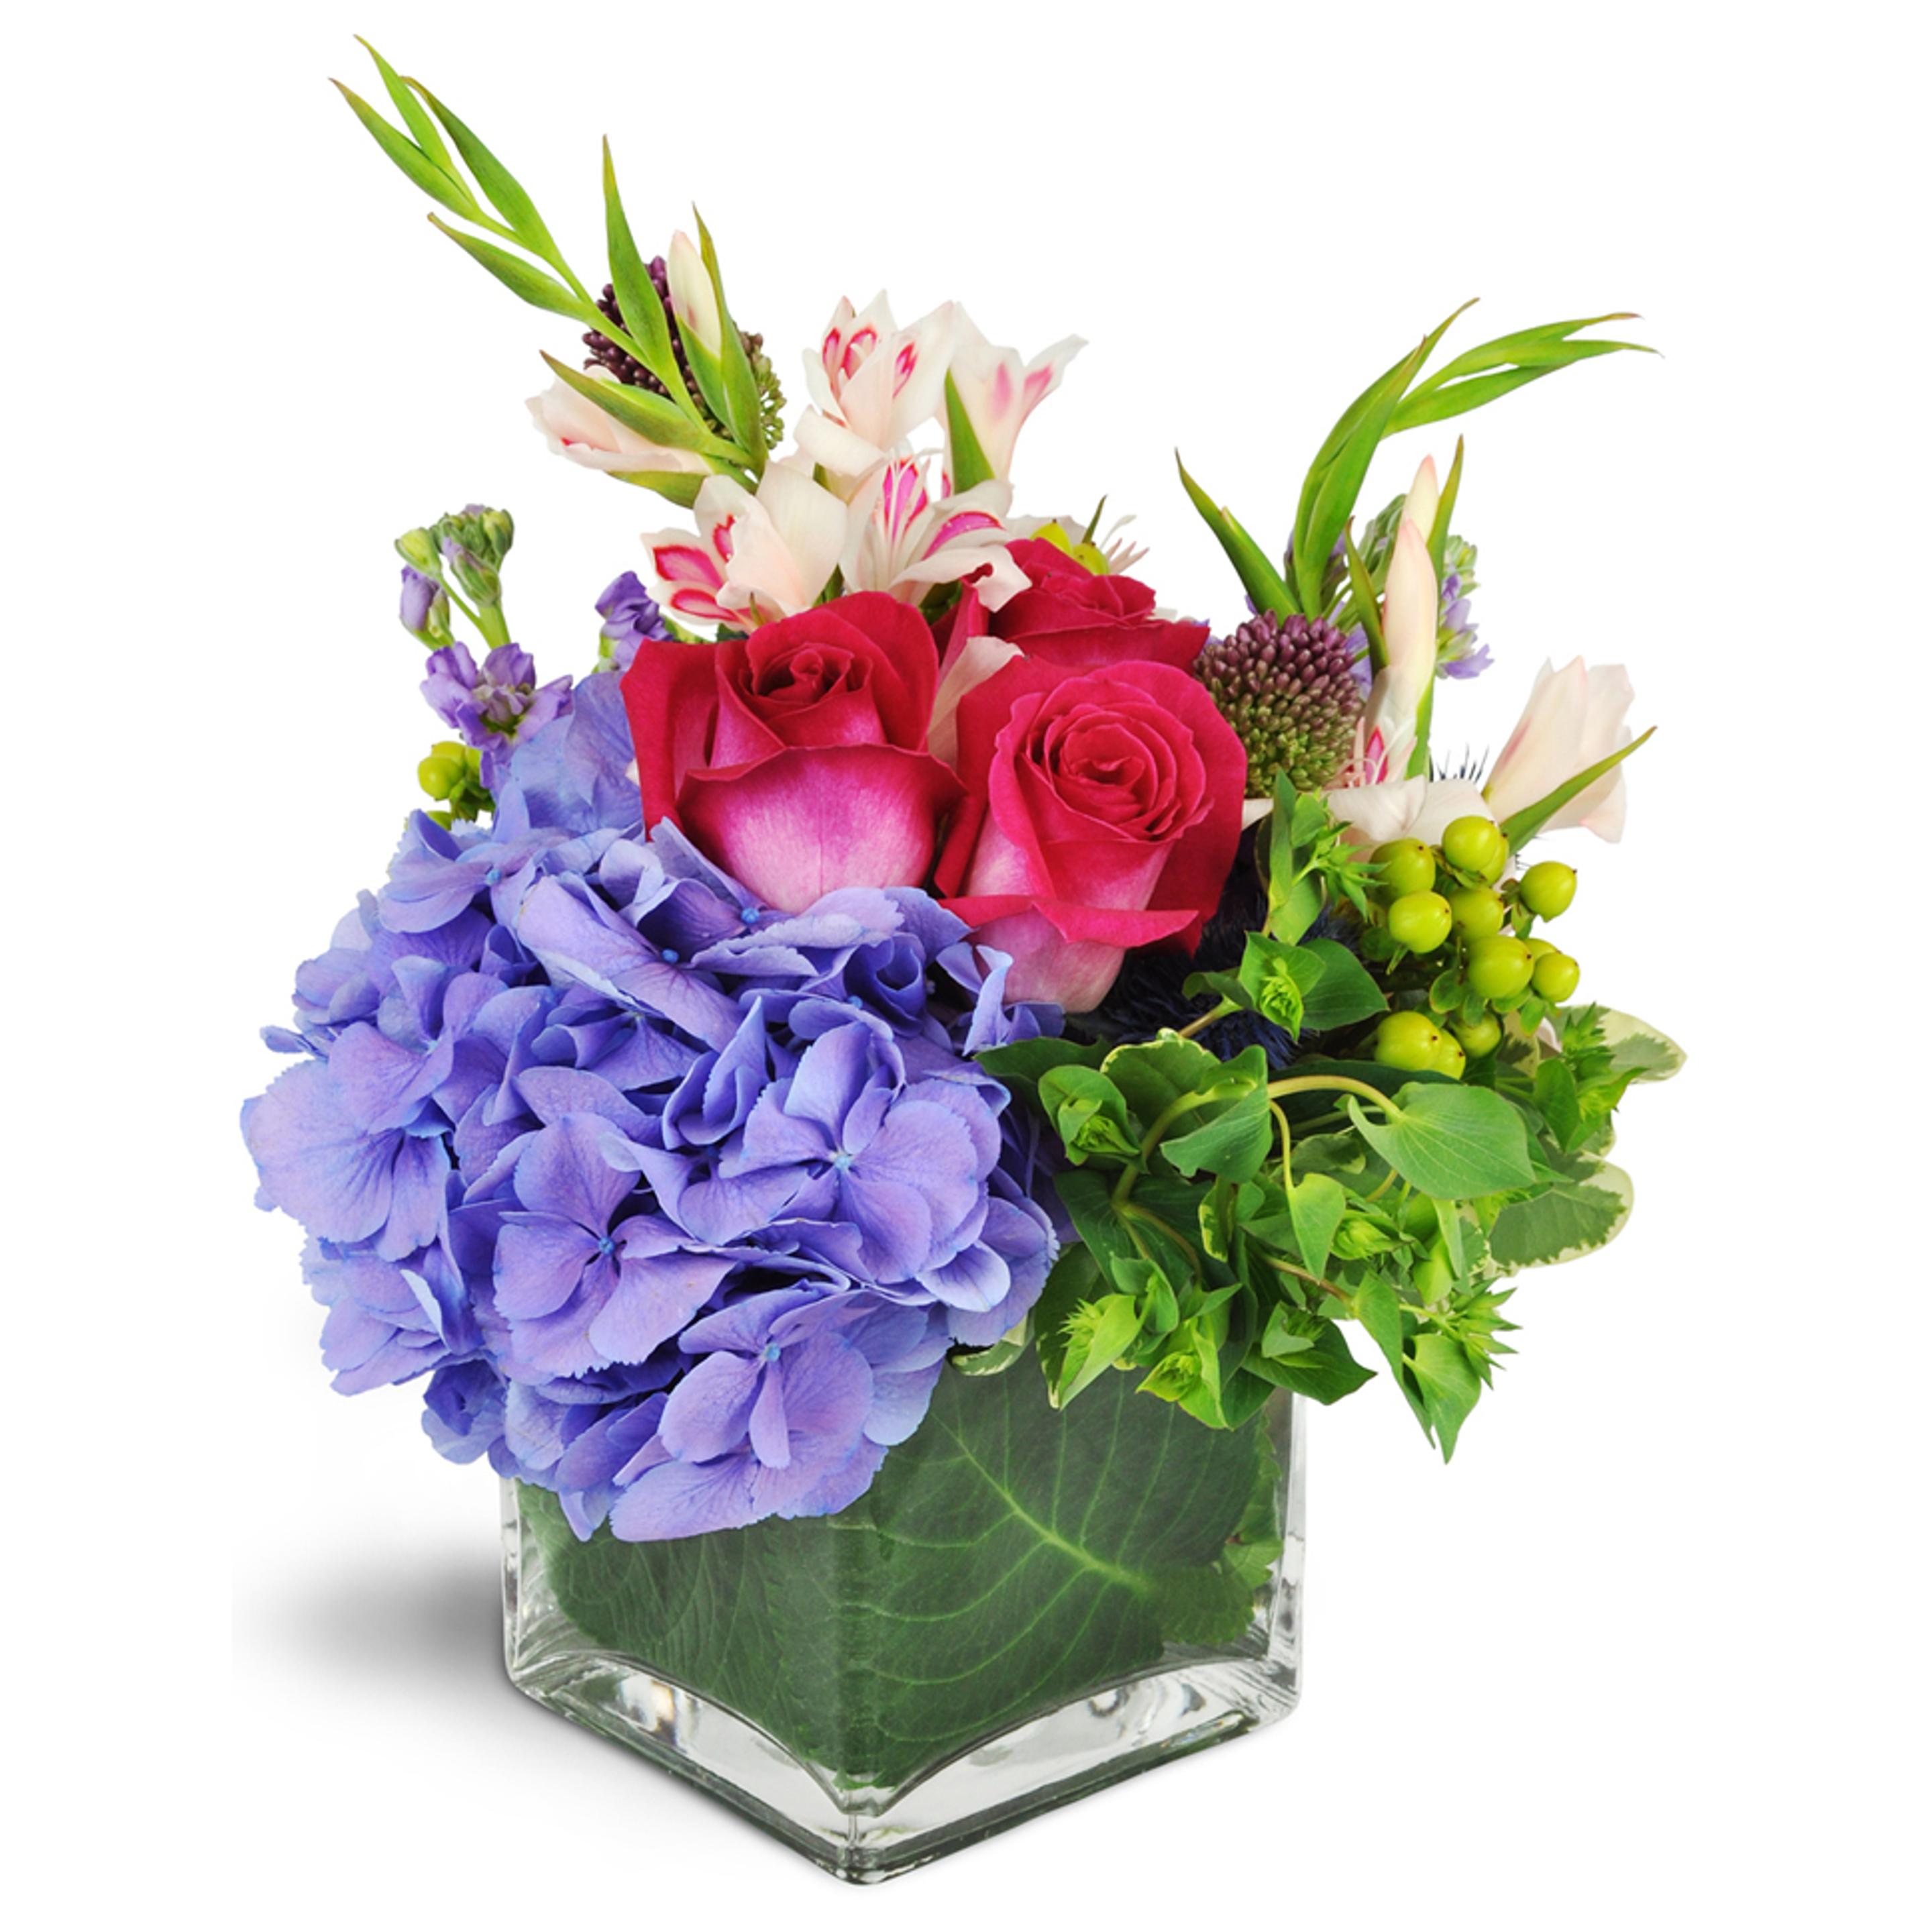 Beautiful flower arrangement in a glass cube vase for birthday best sellers